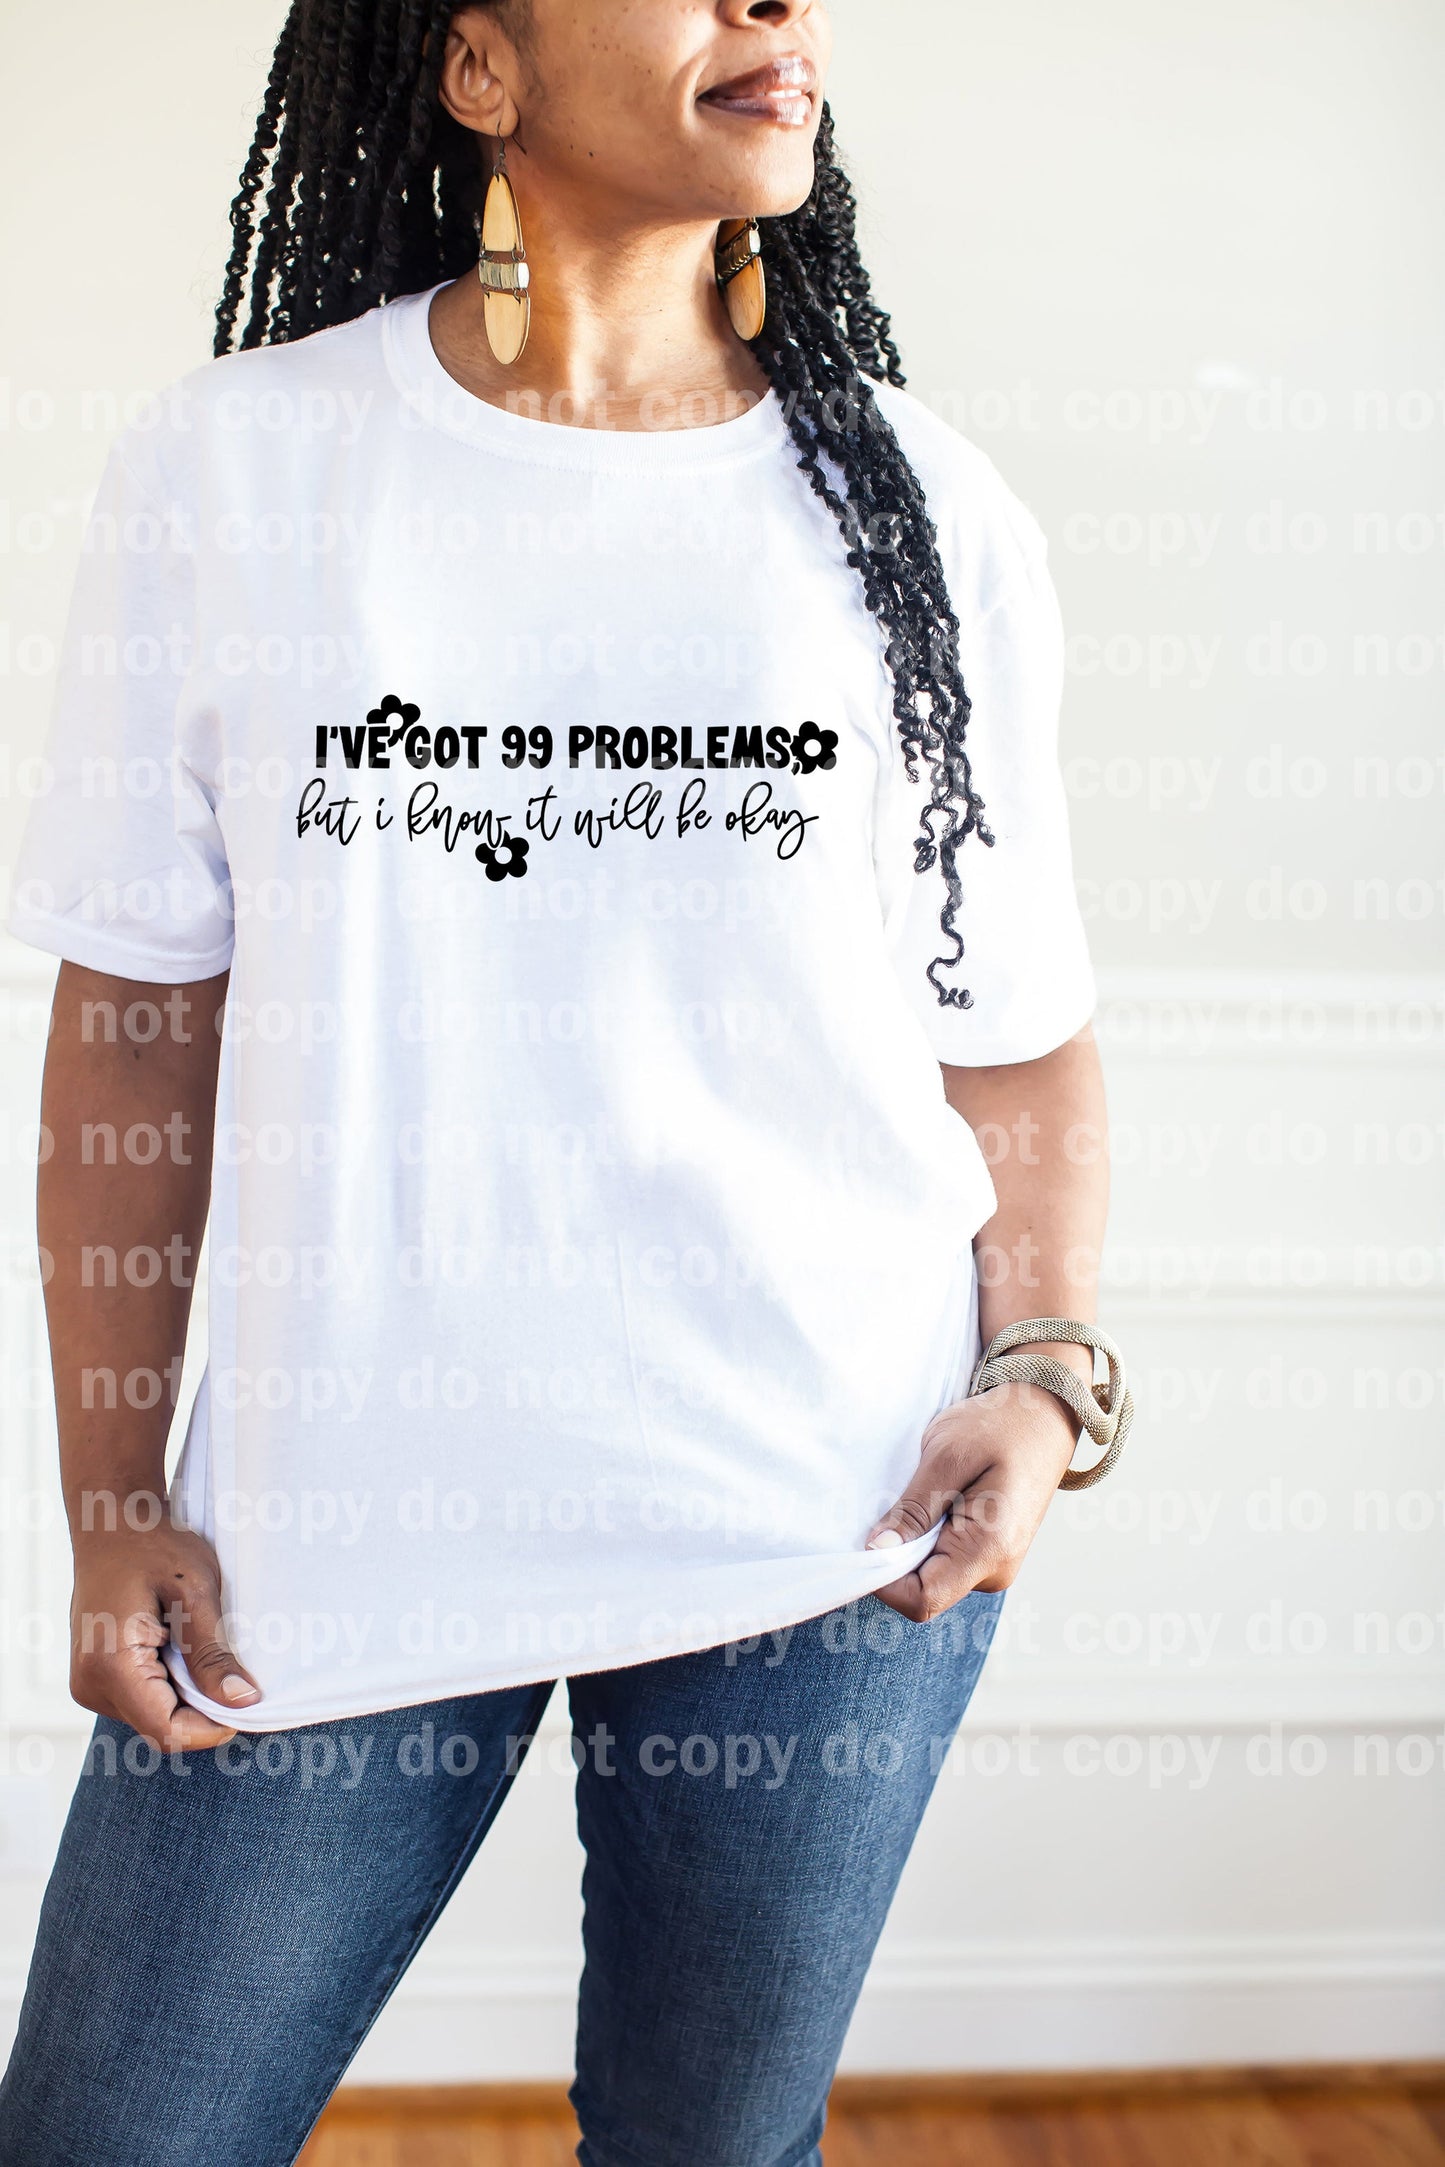 I've Got 99 Problems But I Know It Will Be Okay Dream Print or Sublimation Print